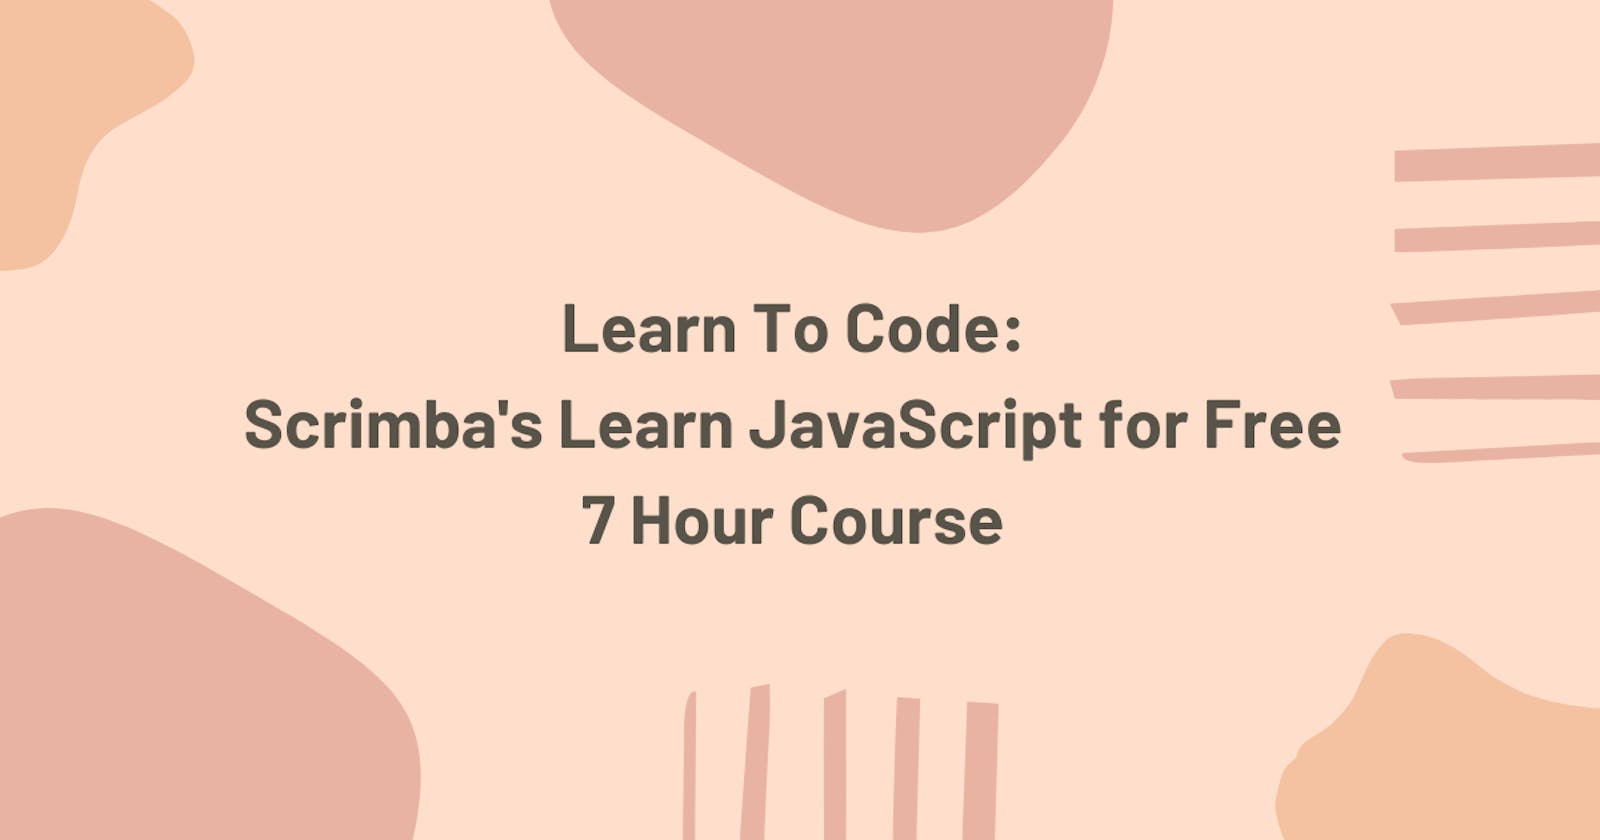 Learn To Code: Scrimba's Learn JavaScript for Free 7 Hour Course